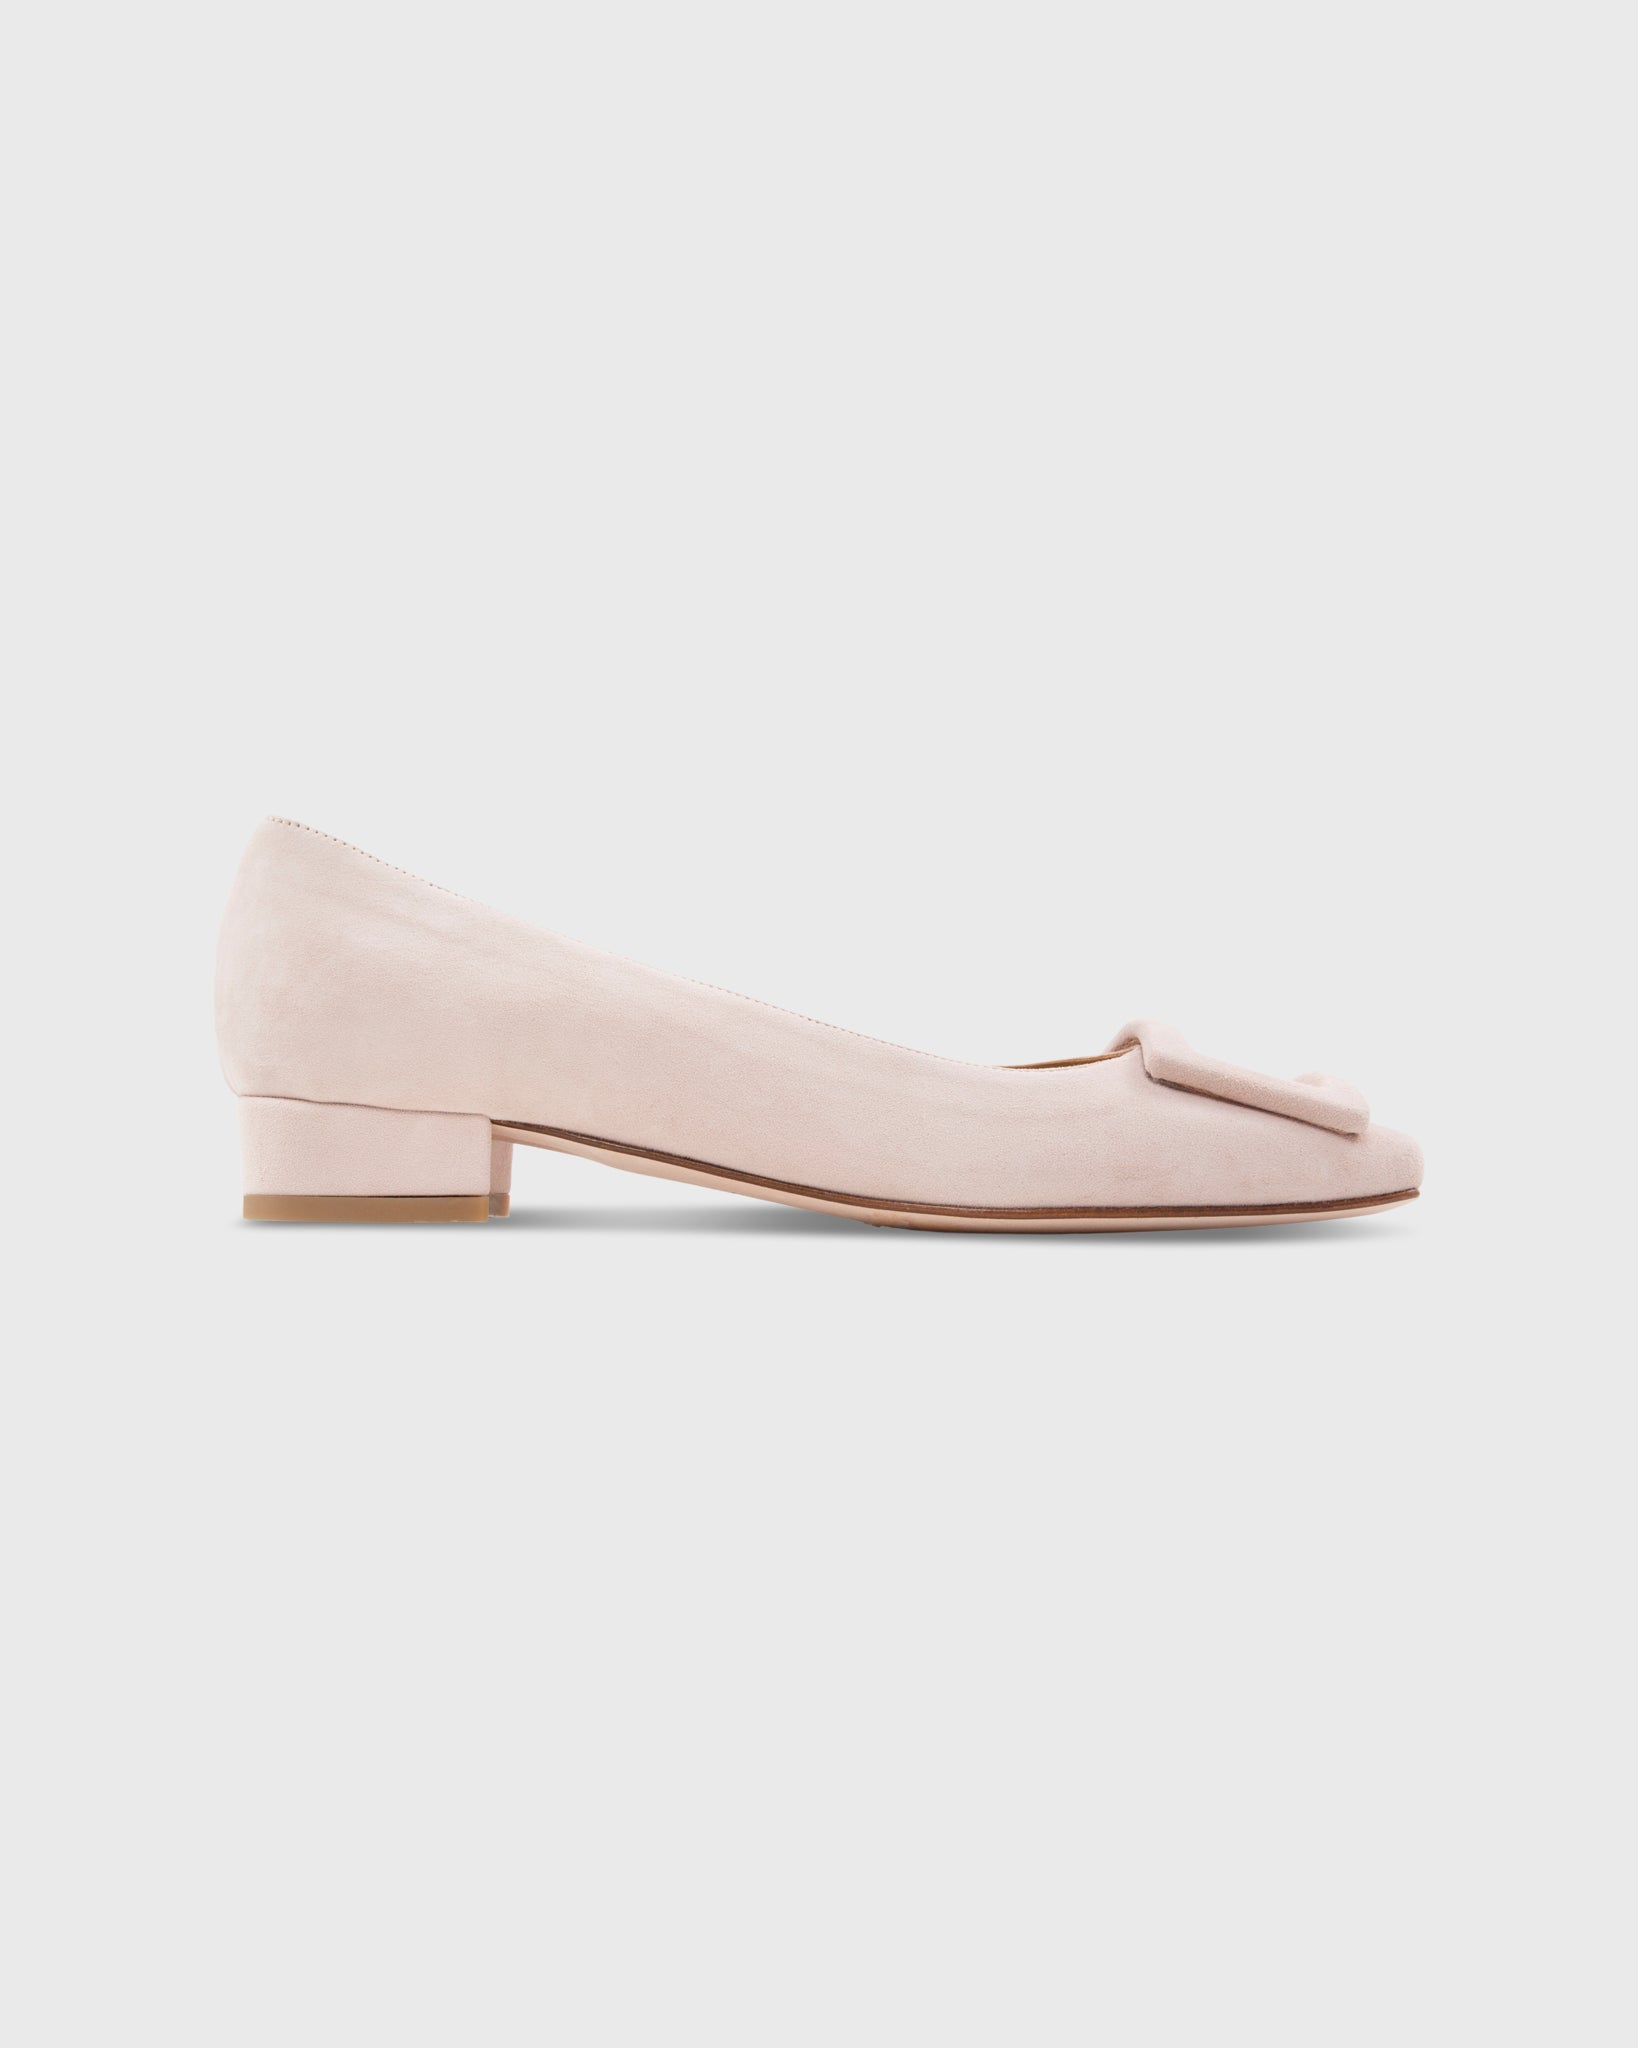 Buckle Shoe in Pale Pink Suede